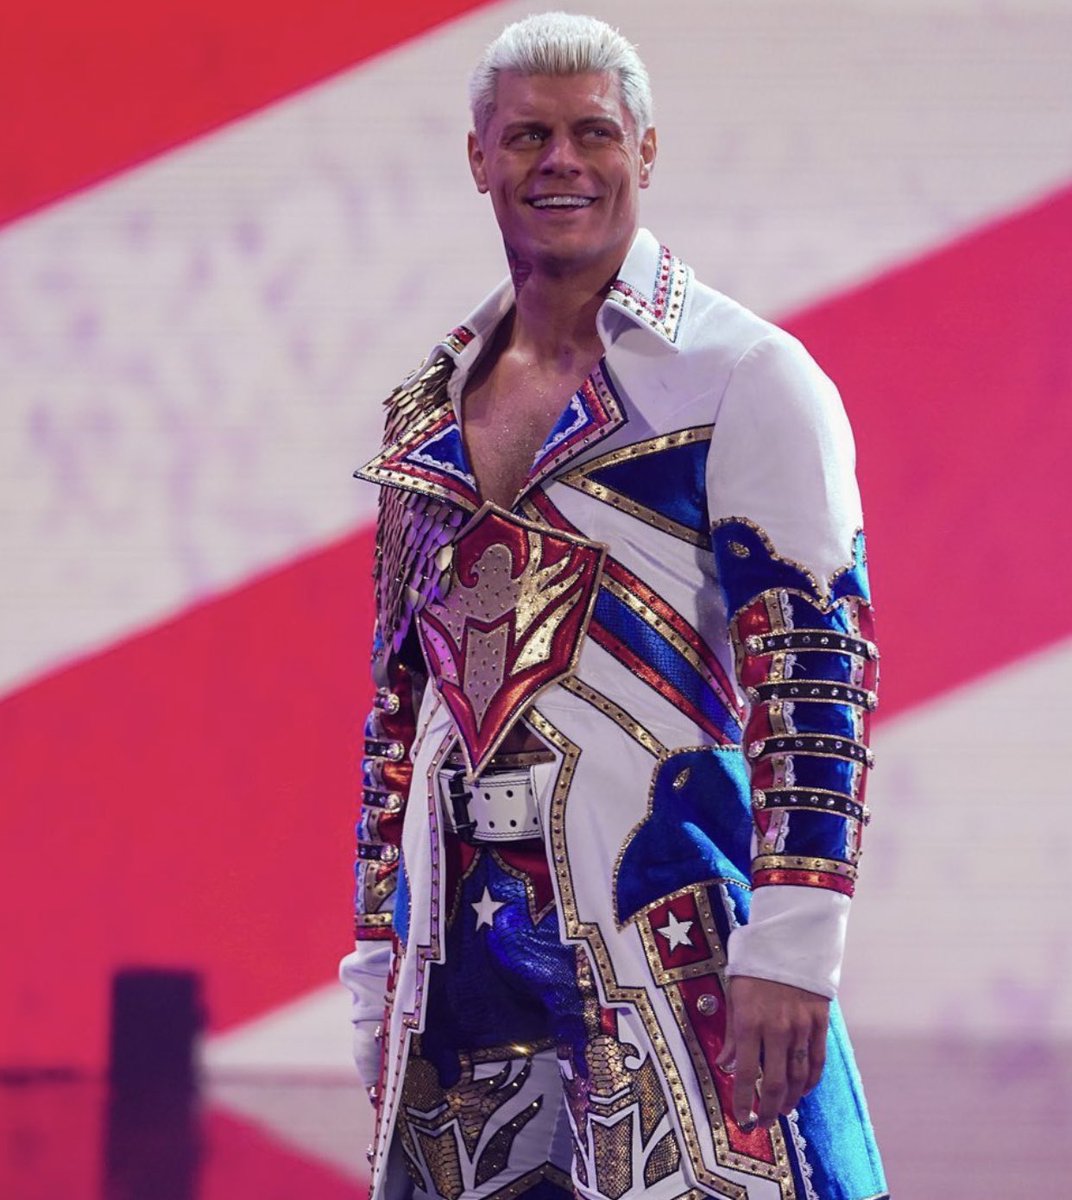 Jacket design I made last year for @CodyRhodes So happy to see it being worn!! ✂️ @sgovintage